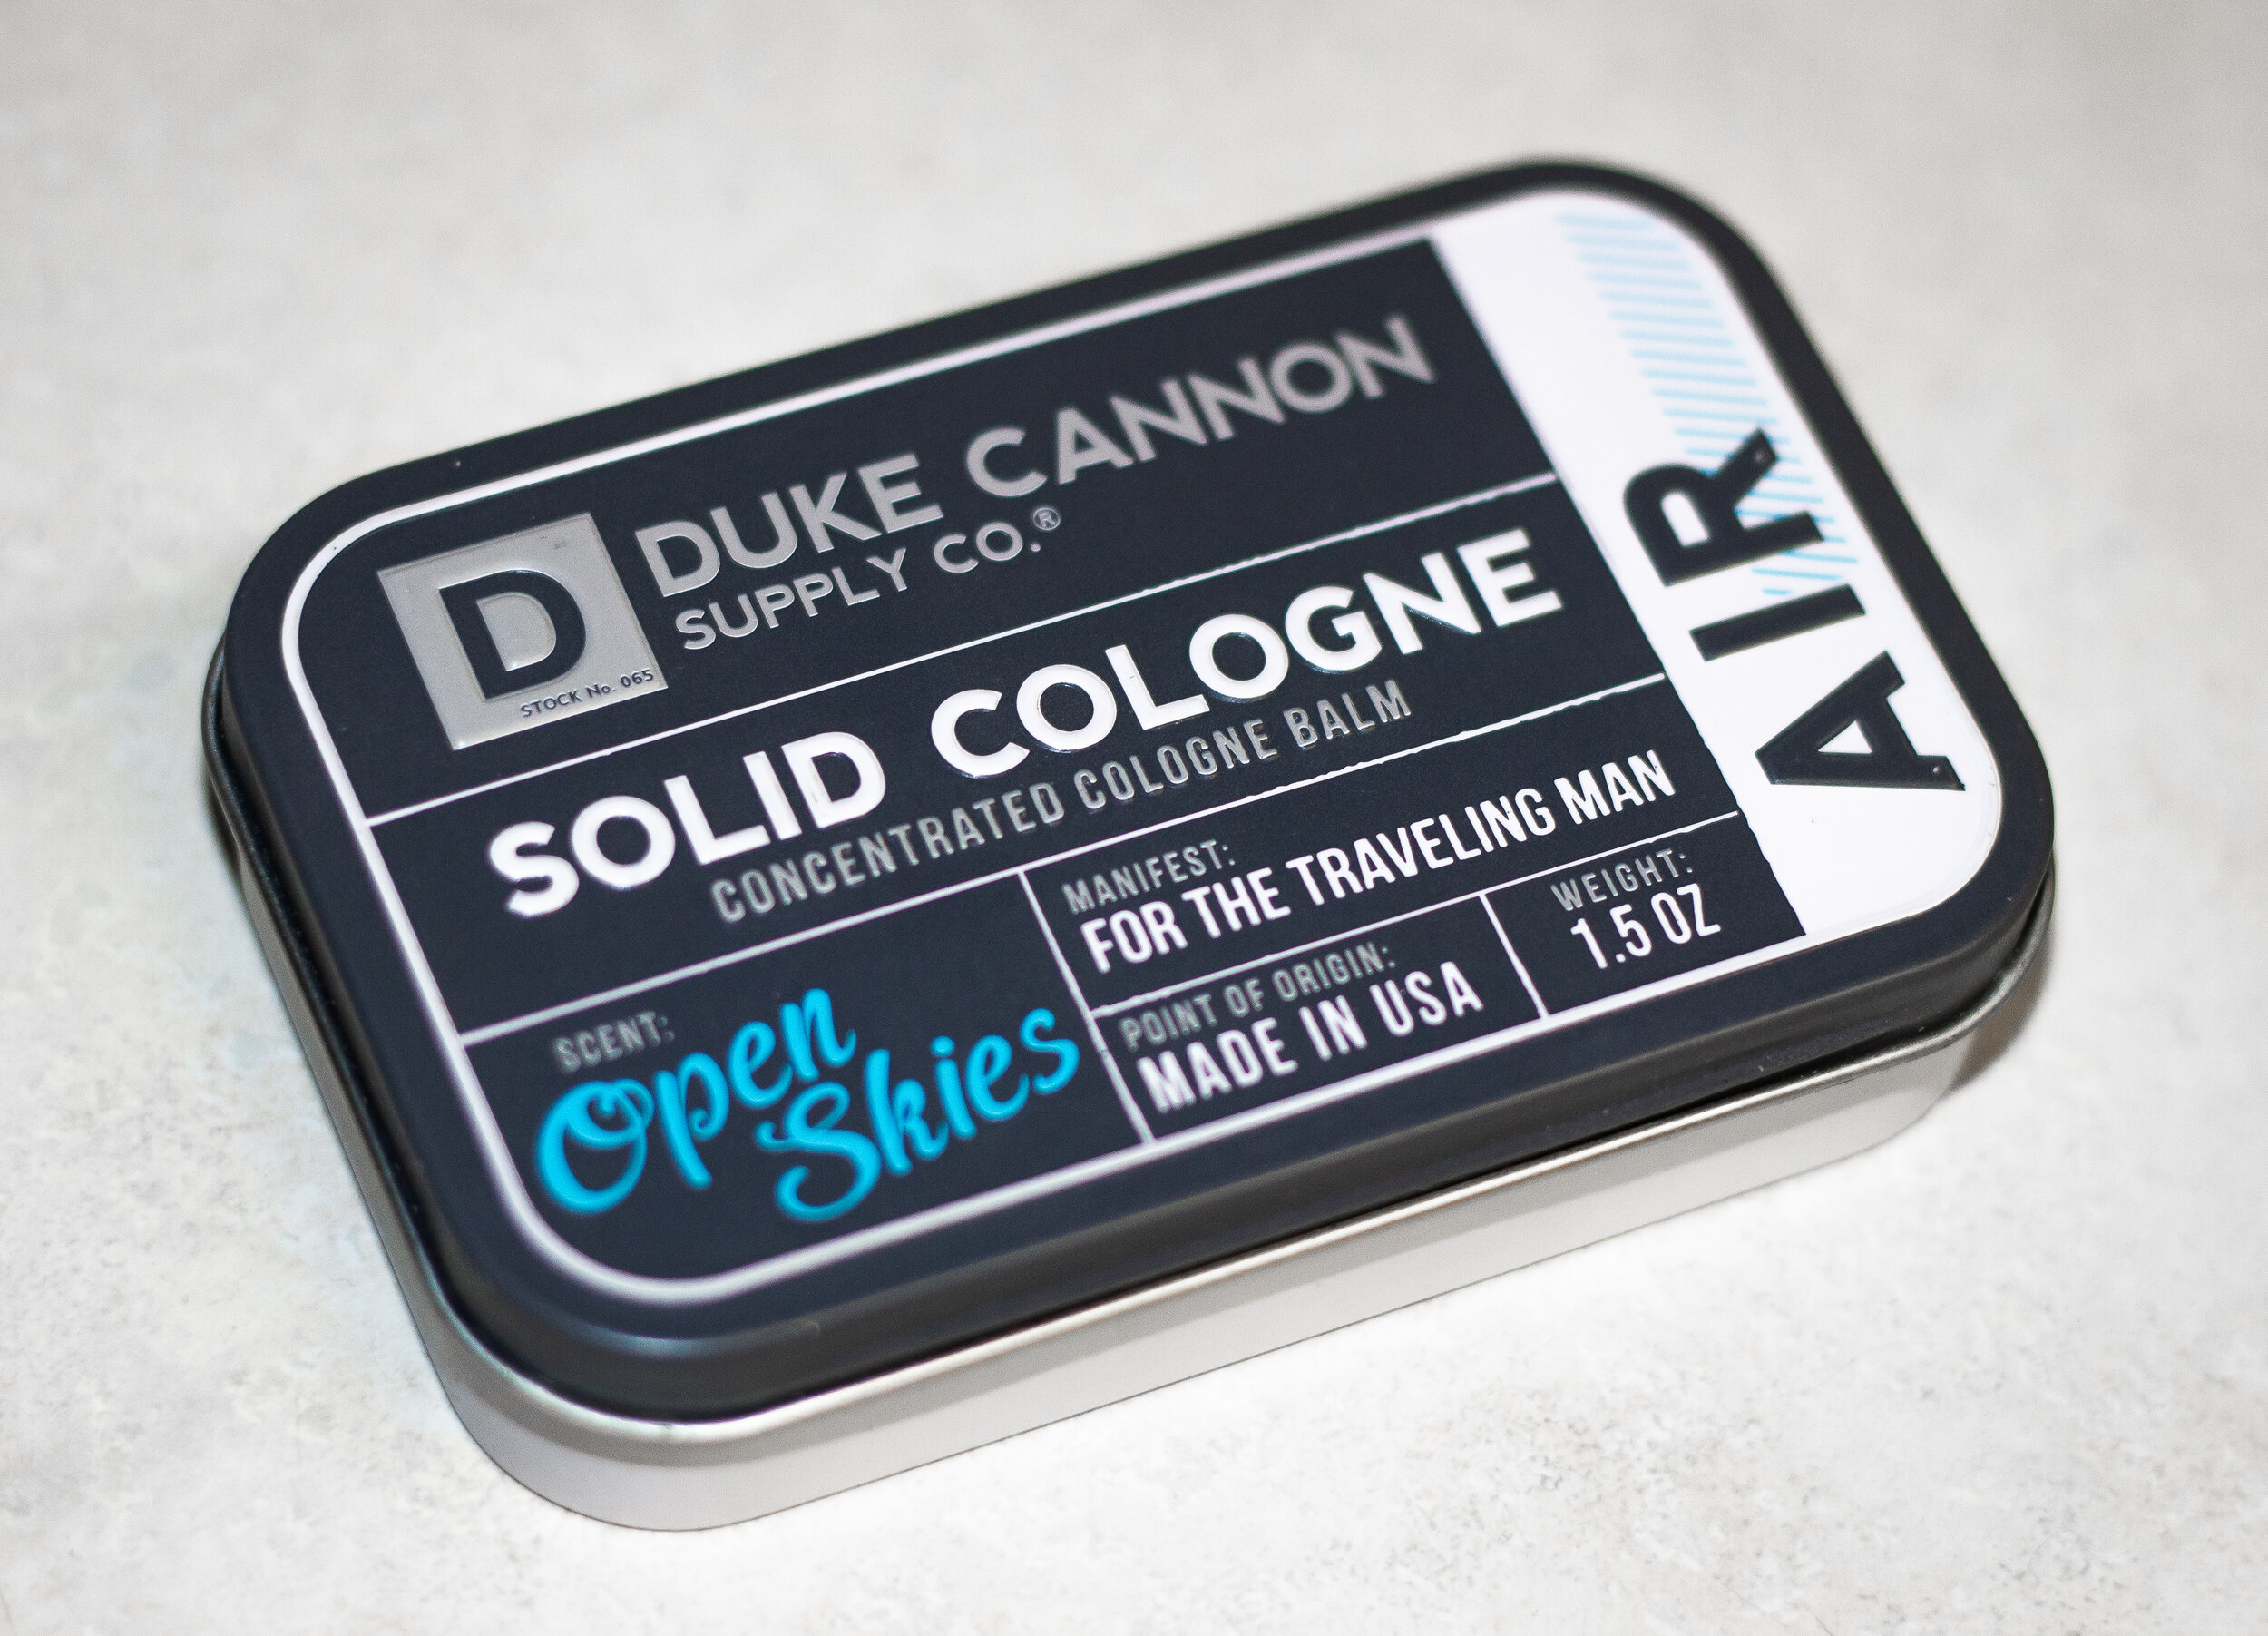 First Look: Duke Cannon Products